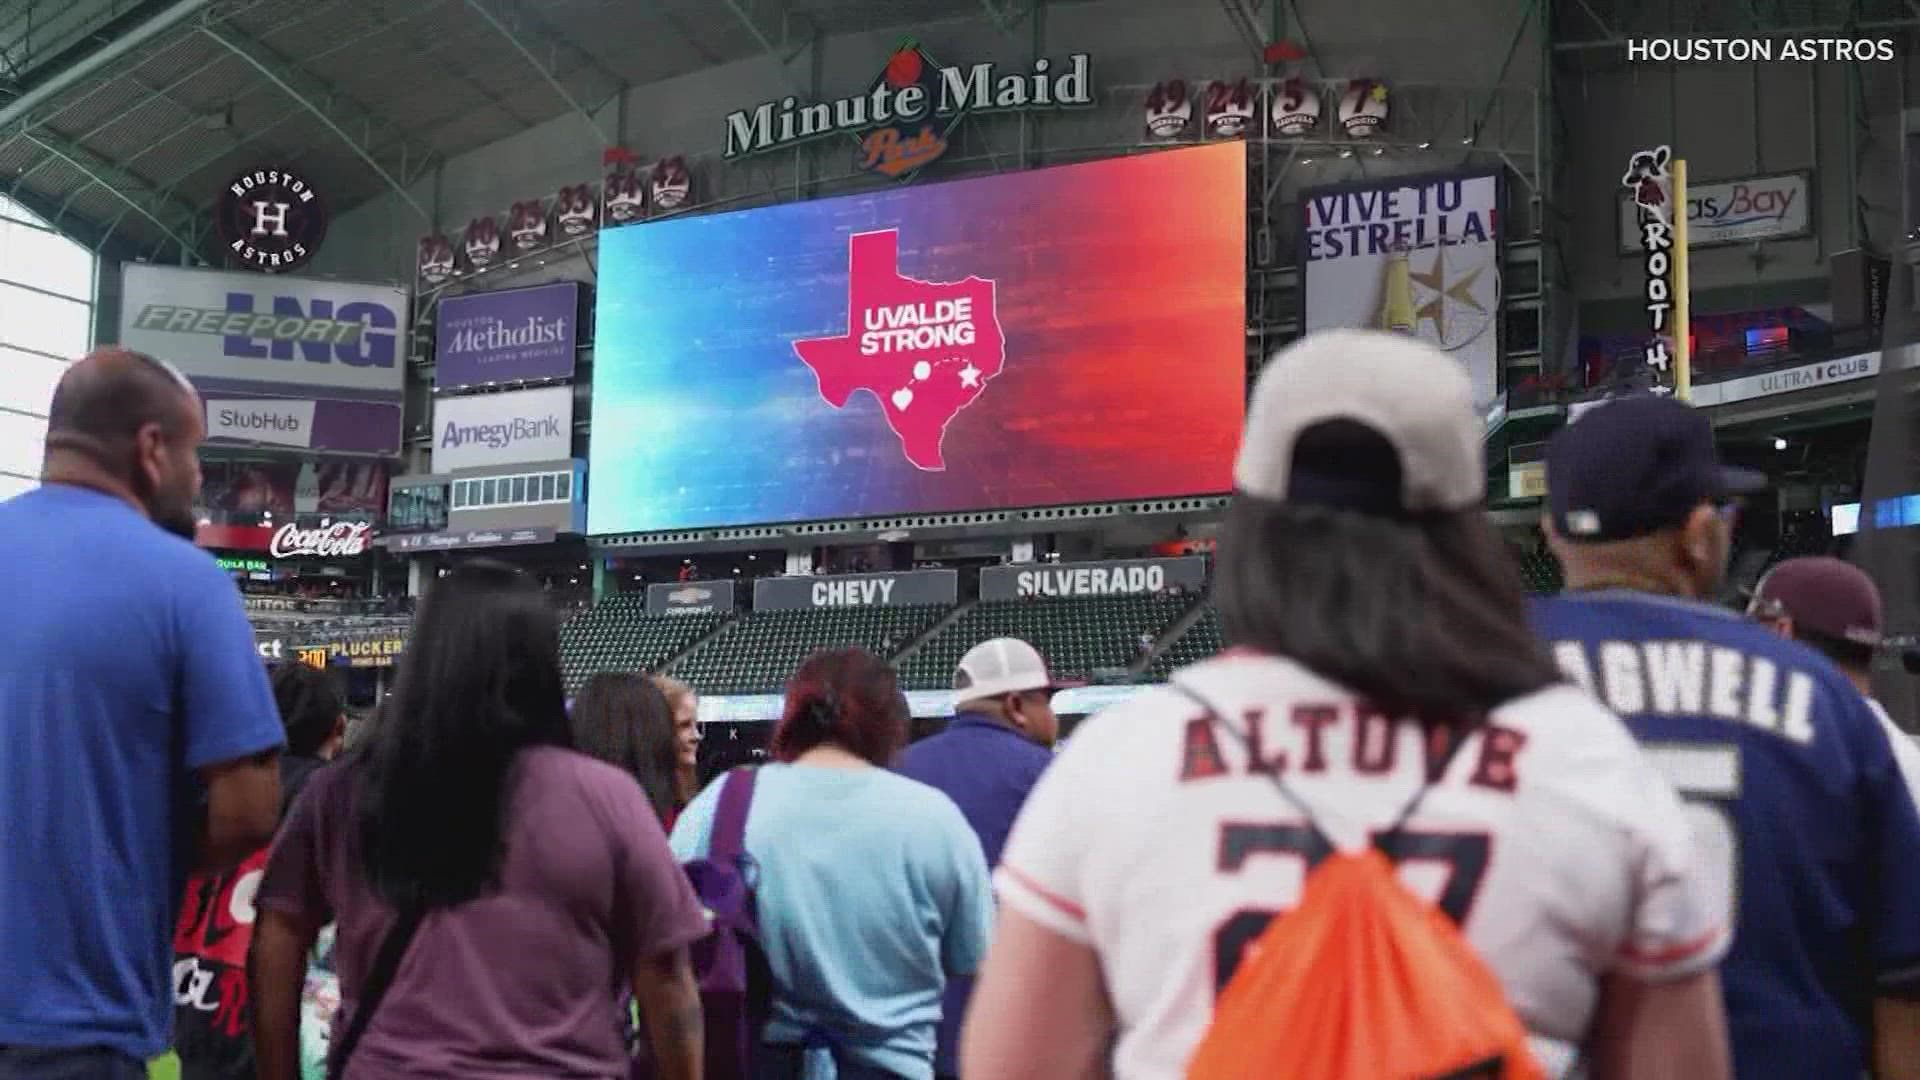 The Houston Fire Department was on hand to welcome families to town as they were escorted to Minute Maid Park.